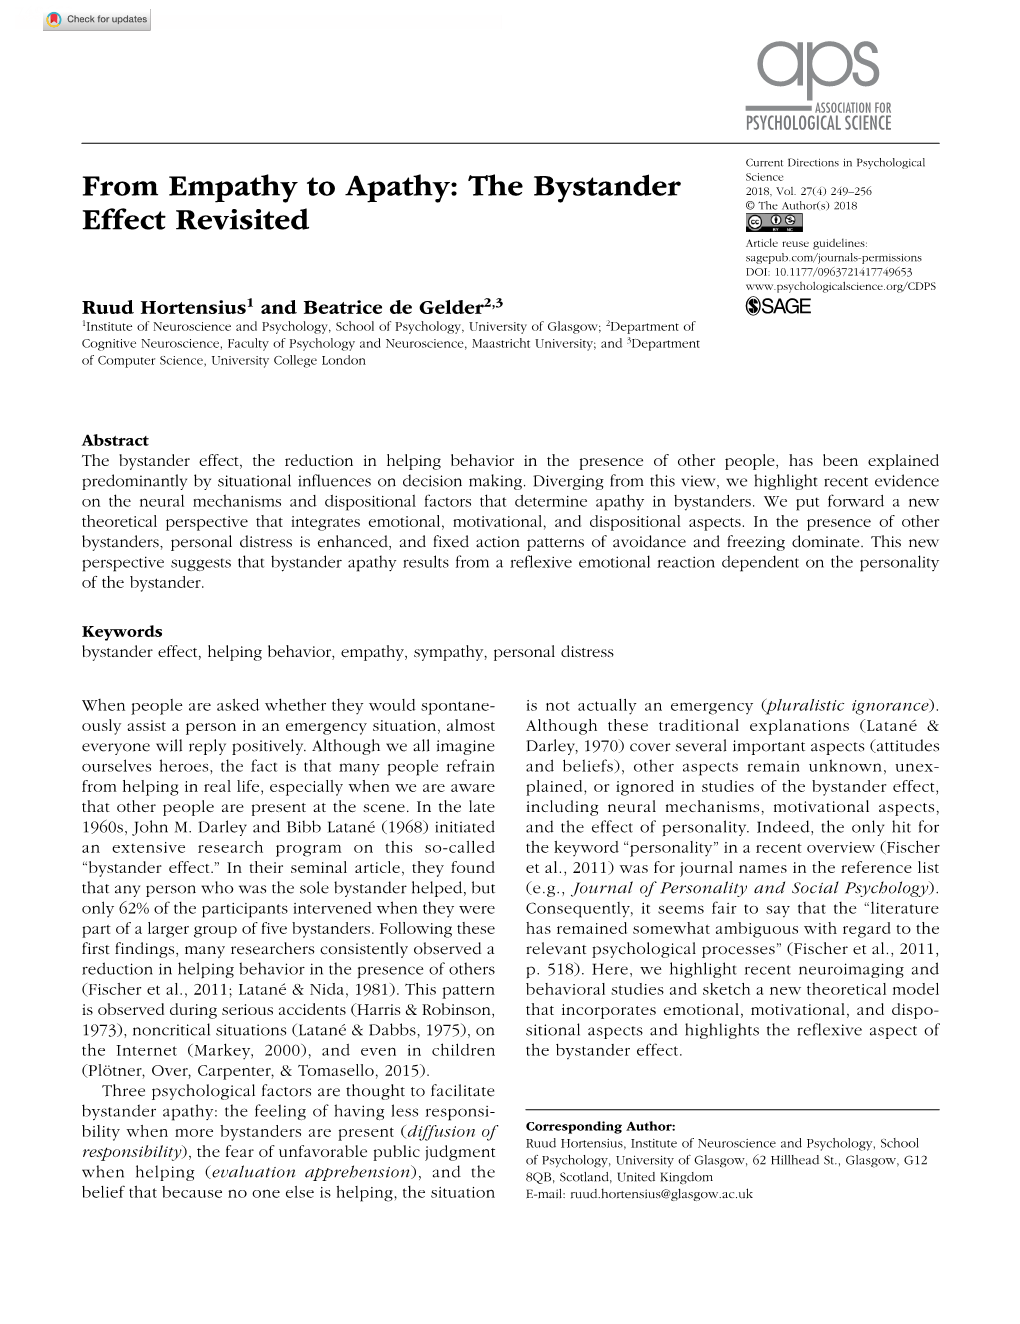 From Empathy to Apathy: the Bystander Effect Revisited